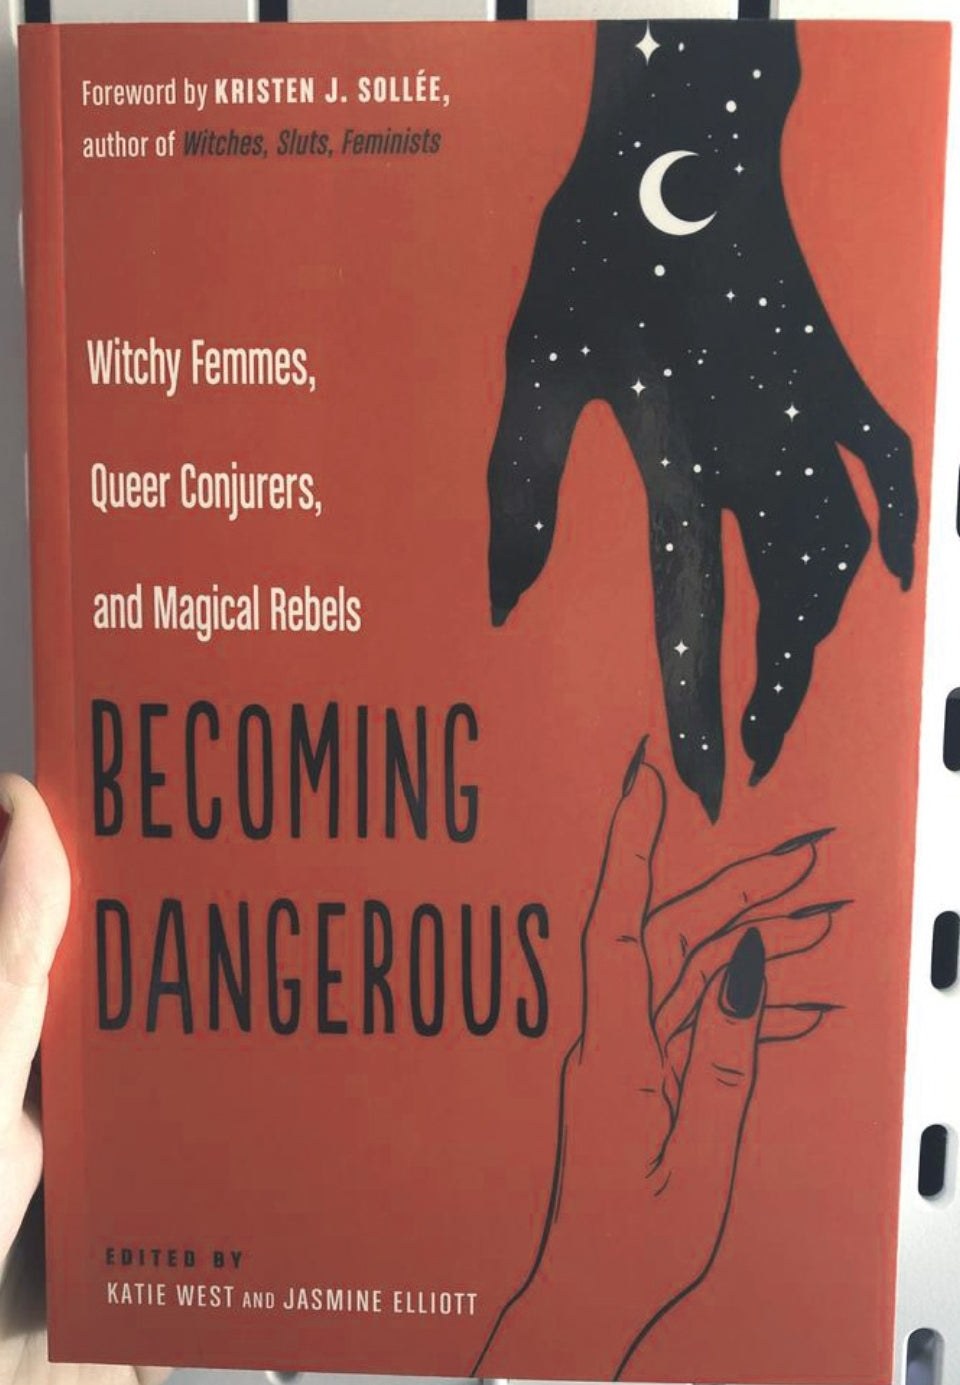 Becoming Dangerous: Witchy Femmes, Queer Conjurers, and Magical Rebels
by Katie West EDITOR, Jasmine Elliott EDITOR and Kristen J. Sollee FOREWORD